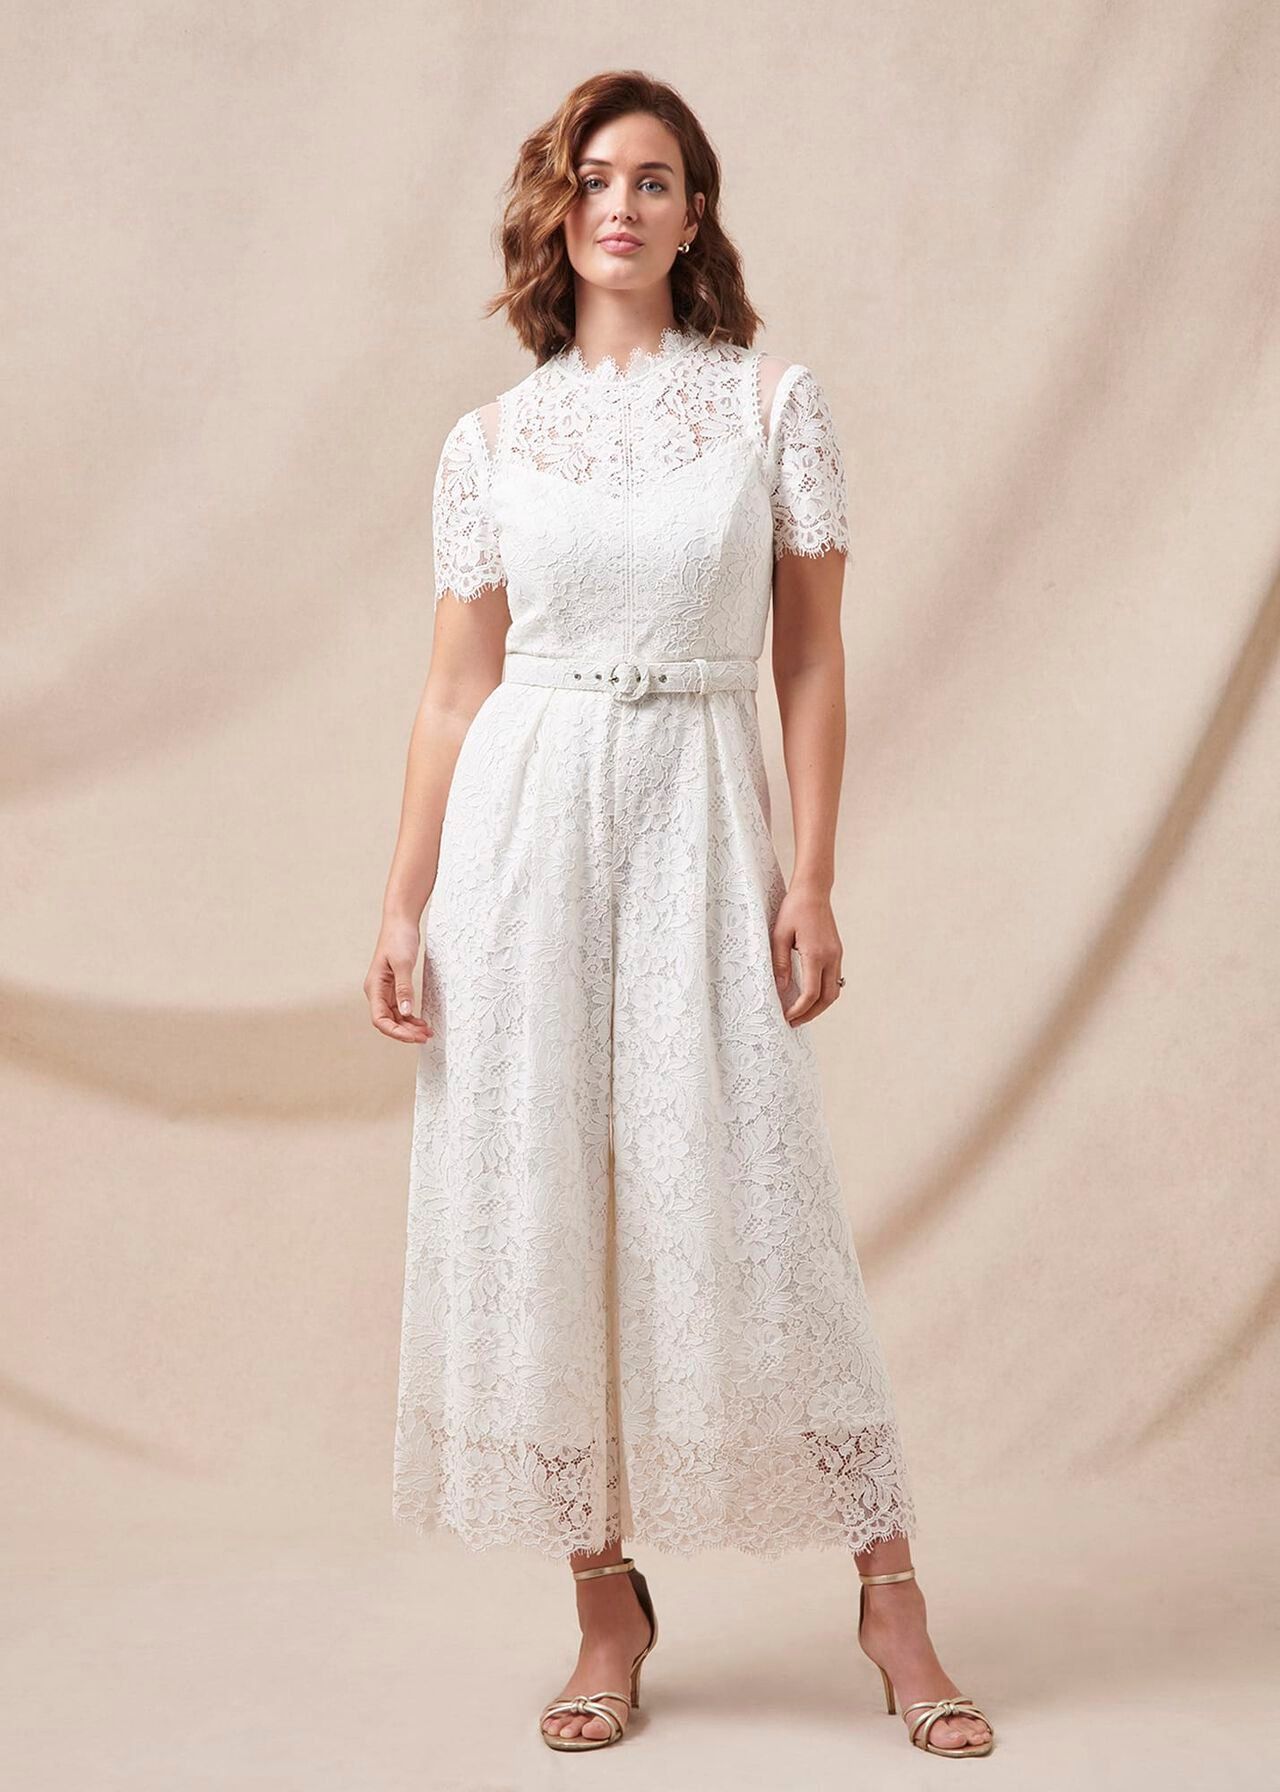 <p><strong>£259.00</strong></p><p>Phase Eight's new bridal range is TDF – and really affordable, tbh. This jumpsuit is cut from scalloped Leavers lace that's left partially unlined to showcase the intricate floral design. We love the cropped wide legs and buckled waist belt, too.</p>